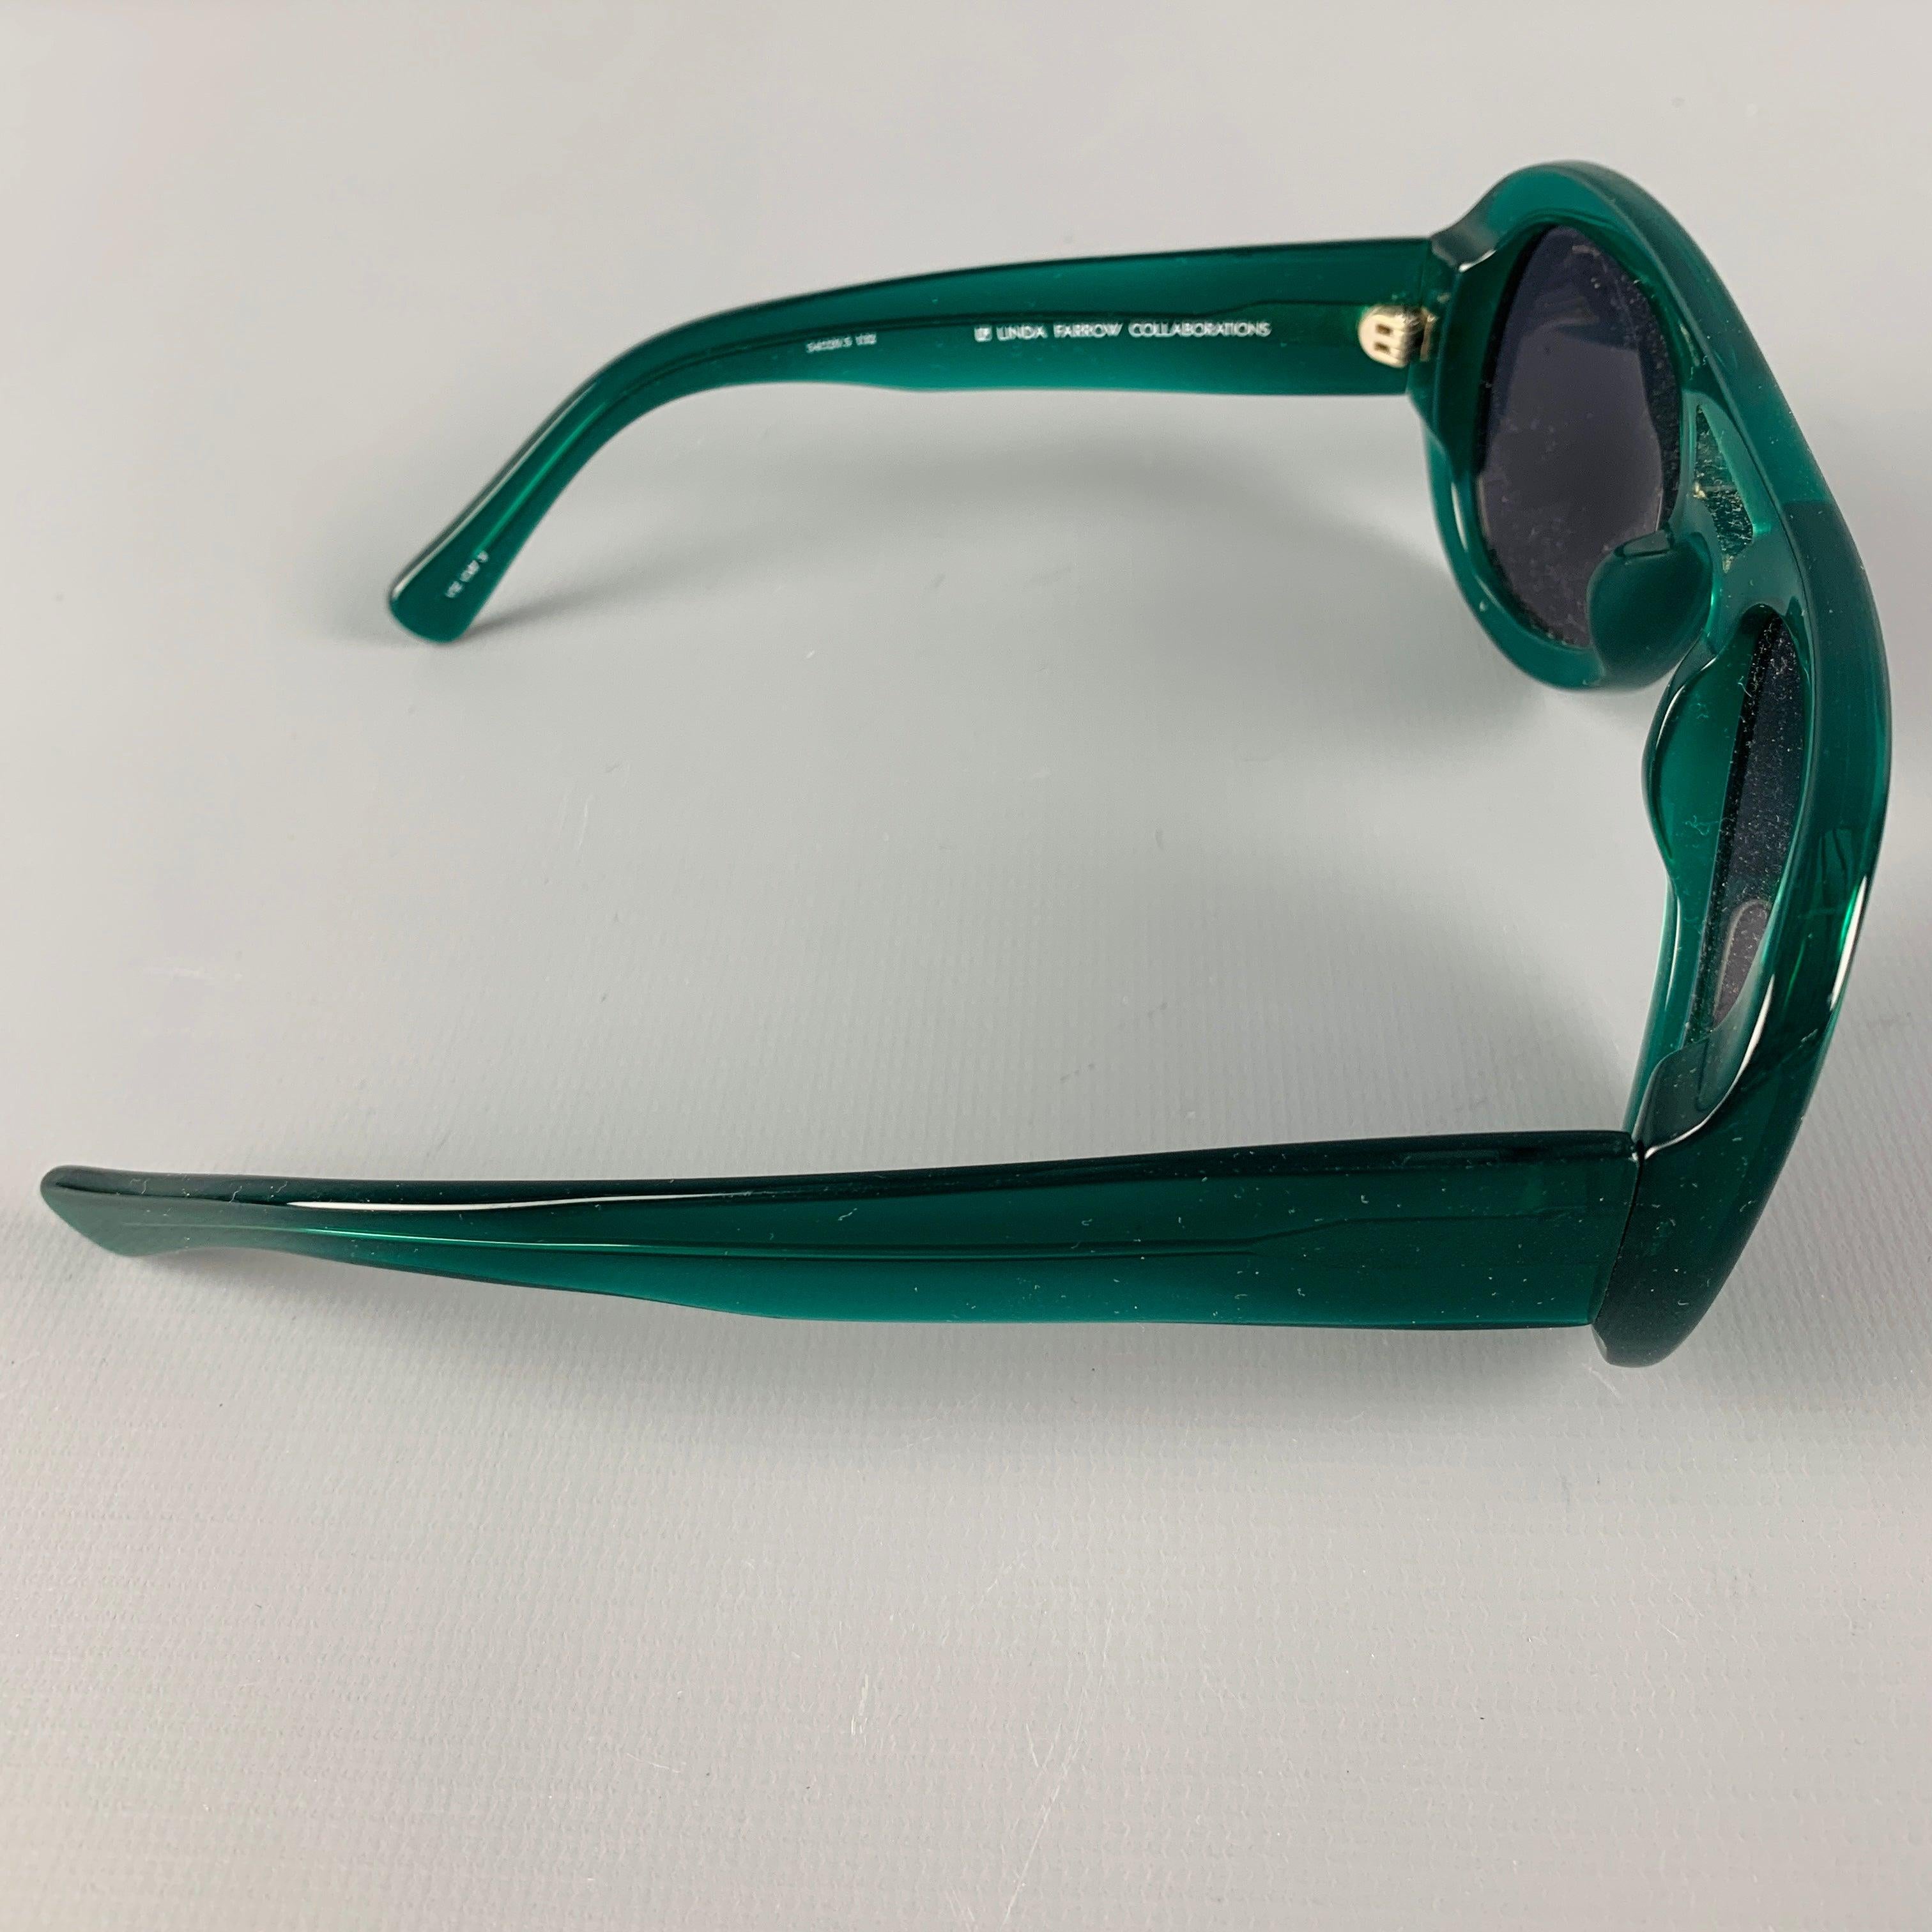 DRIES VAN NOTEN x LINDA FARROW sunglasses in a green acetate with silver tone hardware featuring tinted grey lenses. Made in Japan.Very Good Pre-Owned Condition. As is. 

Marked:   DVN/25/4  

Measurements: 
  Length: 12 cm.Height: 4.5 cm.
  
  
